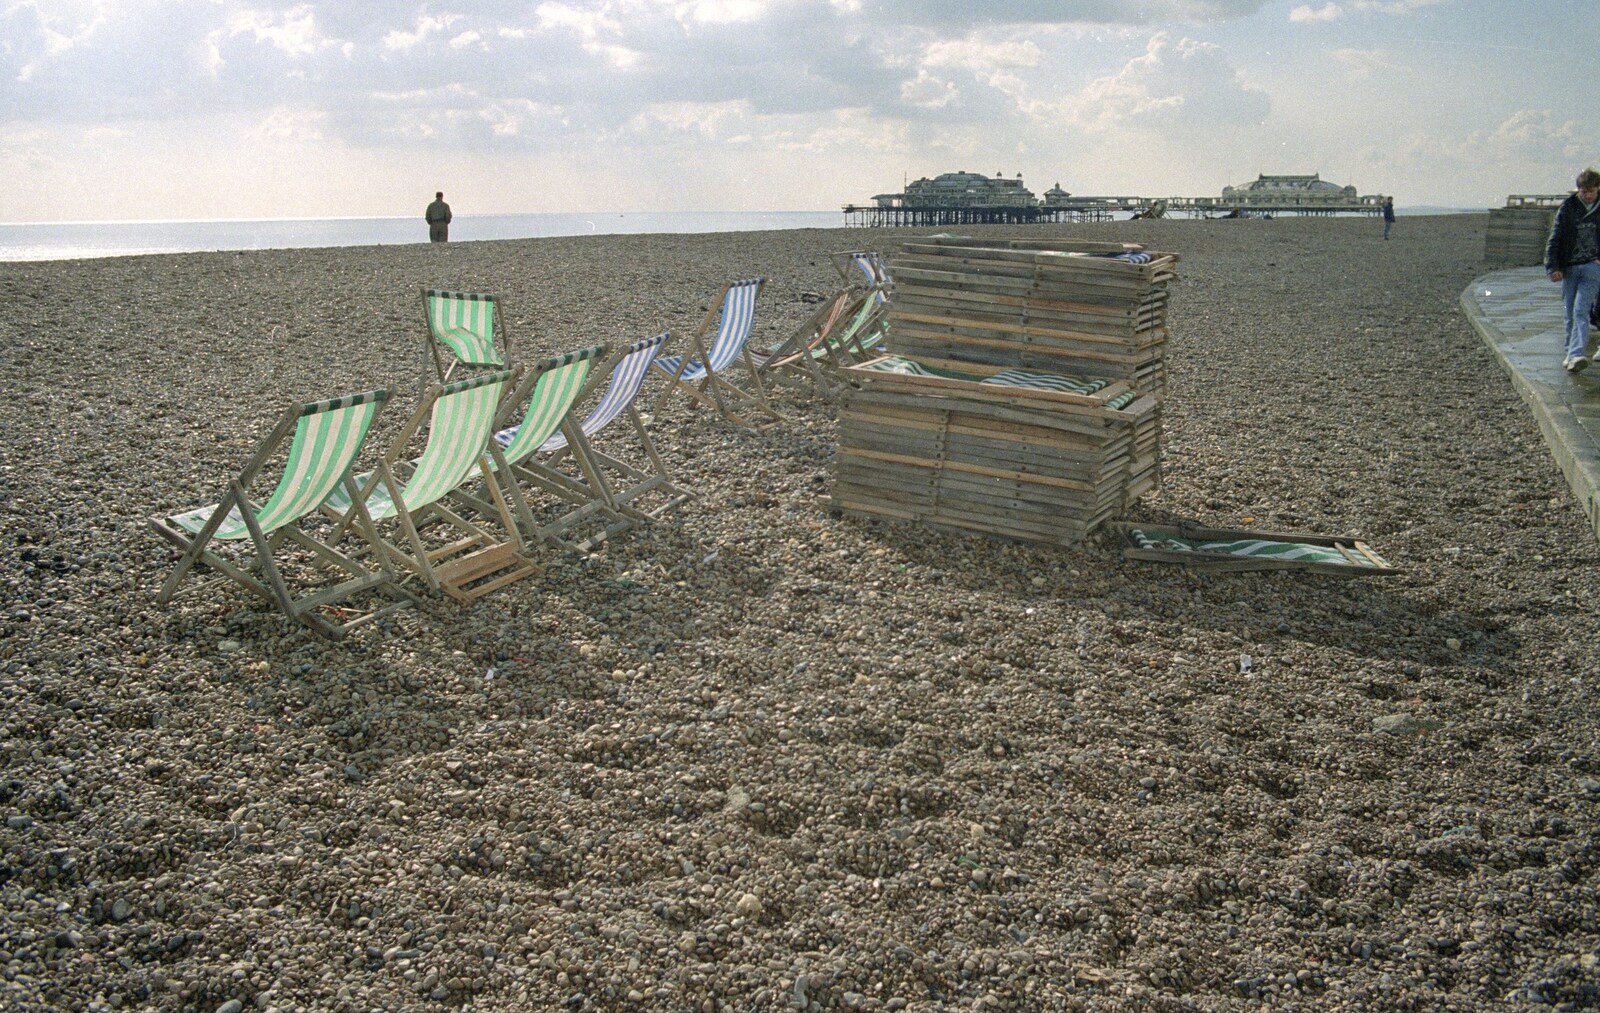 Deckchairs on the beach from Brighton Rock: Visiting Riki and John, Brighton, East Sussex - 5th March 1990